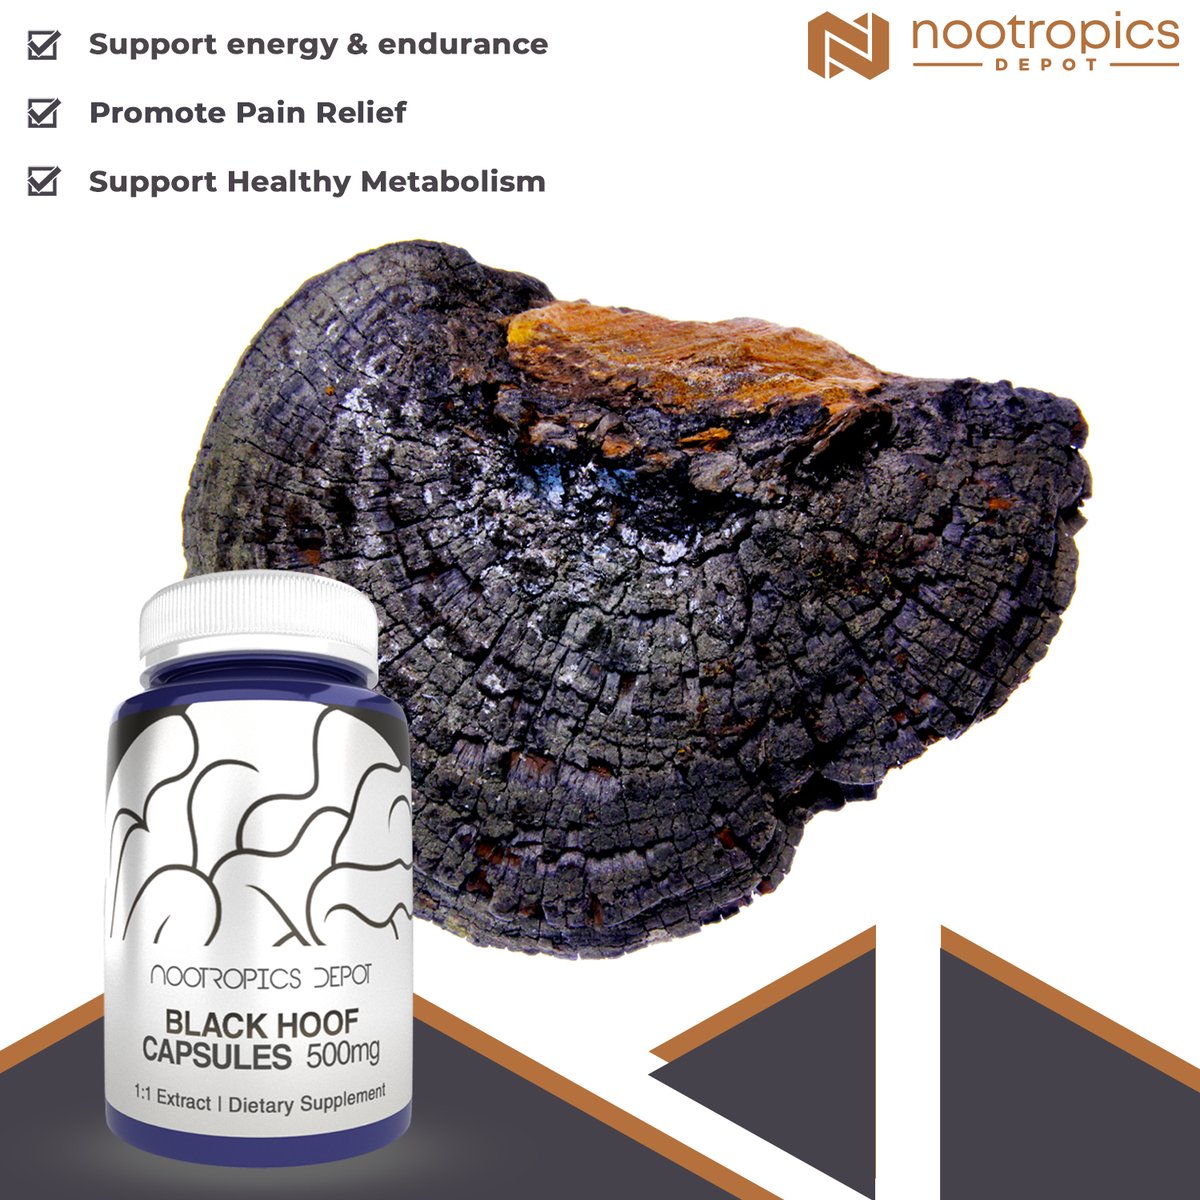 Have you ever wondered what the mushrooms look like before they get made into powders or capsules? 💭
.
.
.
Well, now you know. . .Black Hoof at least. 🍄
.
.
#nootropicsdepot #blackhoof #naturalnootropics #naturalmushrooms #mushroomextract #blackhoofextract